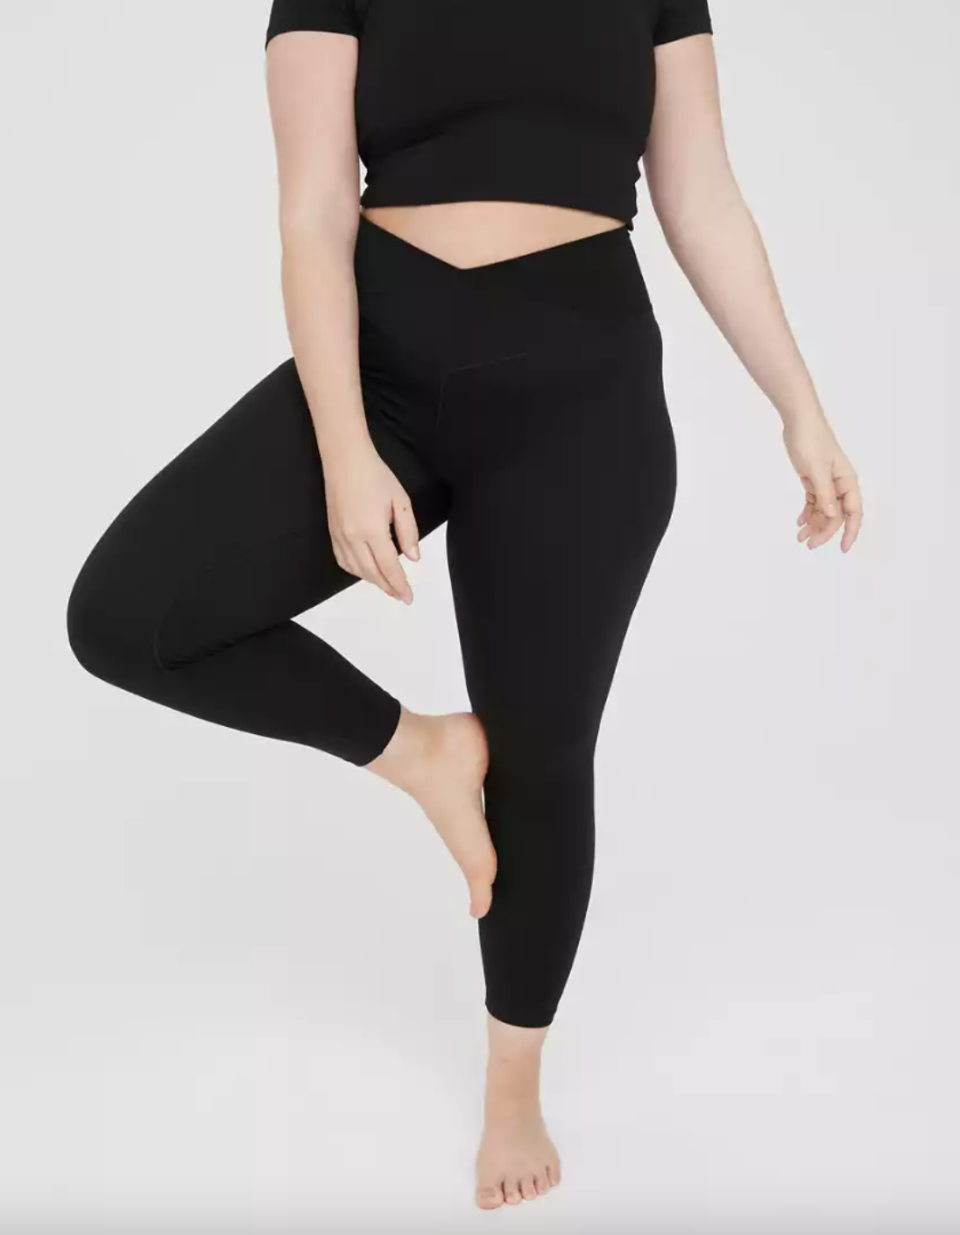 12) OFFLINE By Aerie Real Me Double Crossover Legging